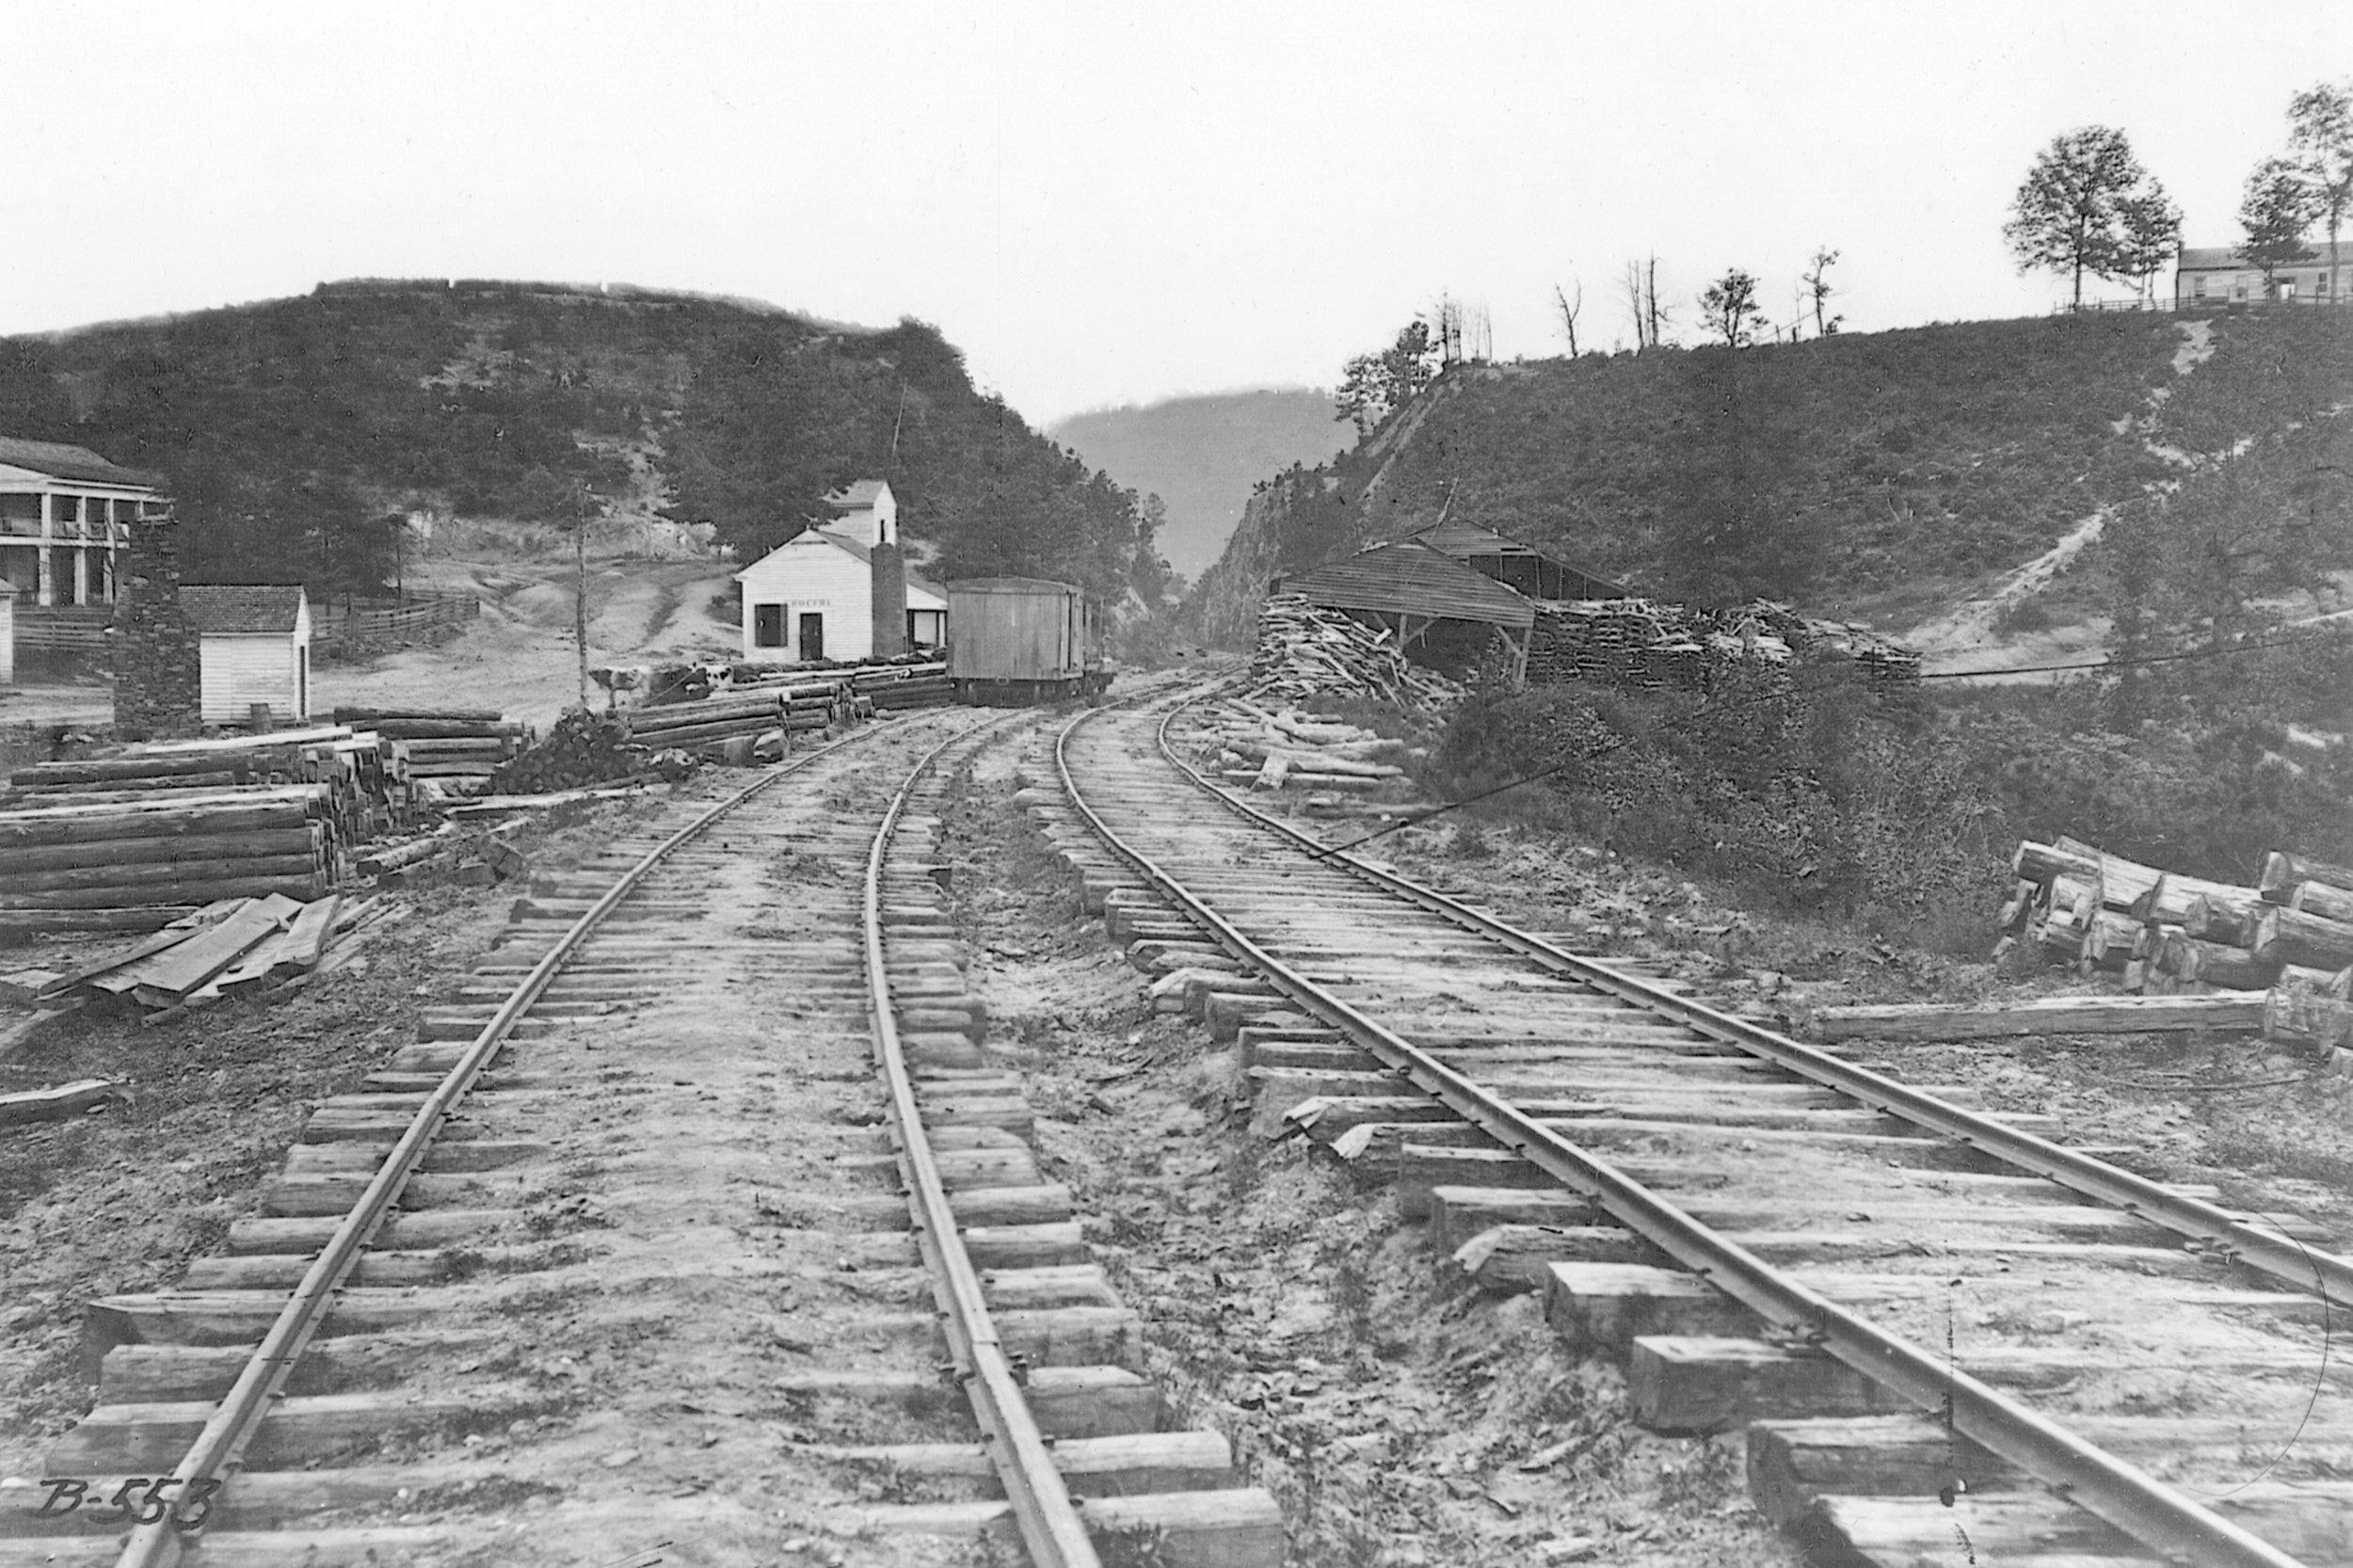 The rail line between Chattanooga and Atlanta passed through a narrow cleft near Allatoona, Georgia. The Federals recognized it as a vital but vulnerable spot. So did the Rebels, who believed they could torment Sherman if they held it. 